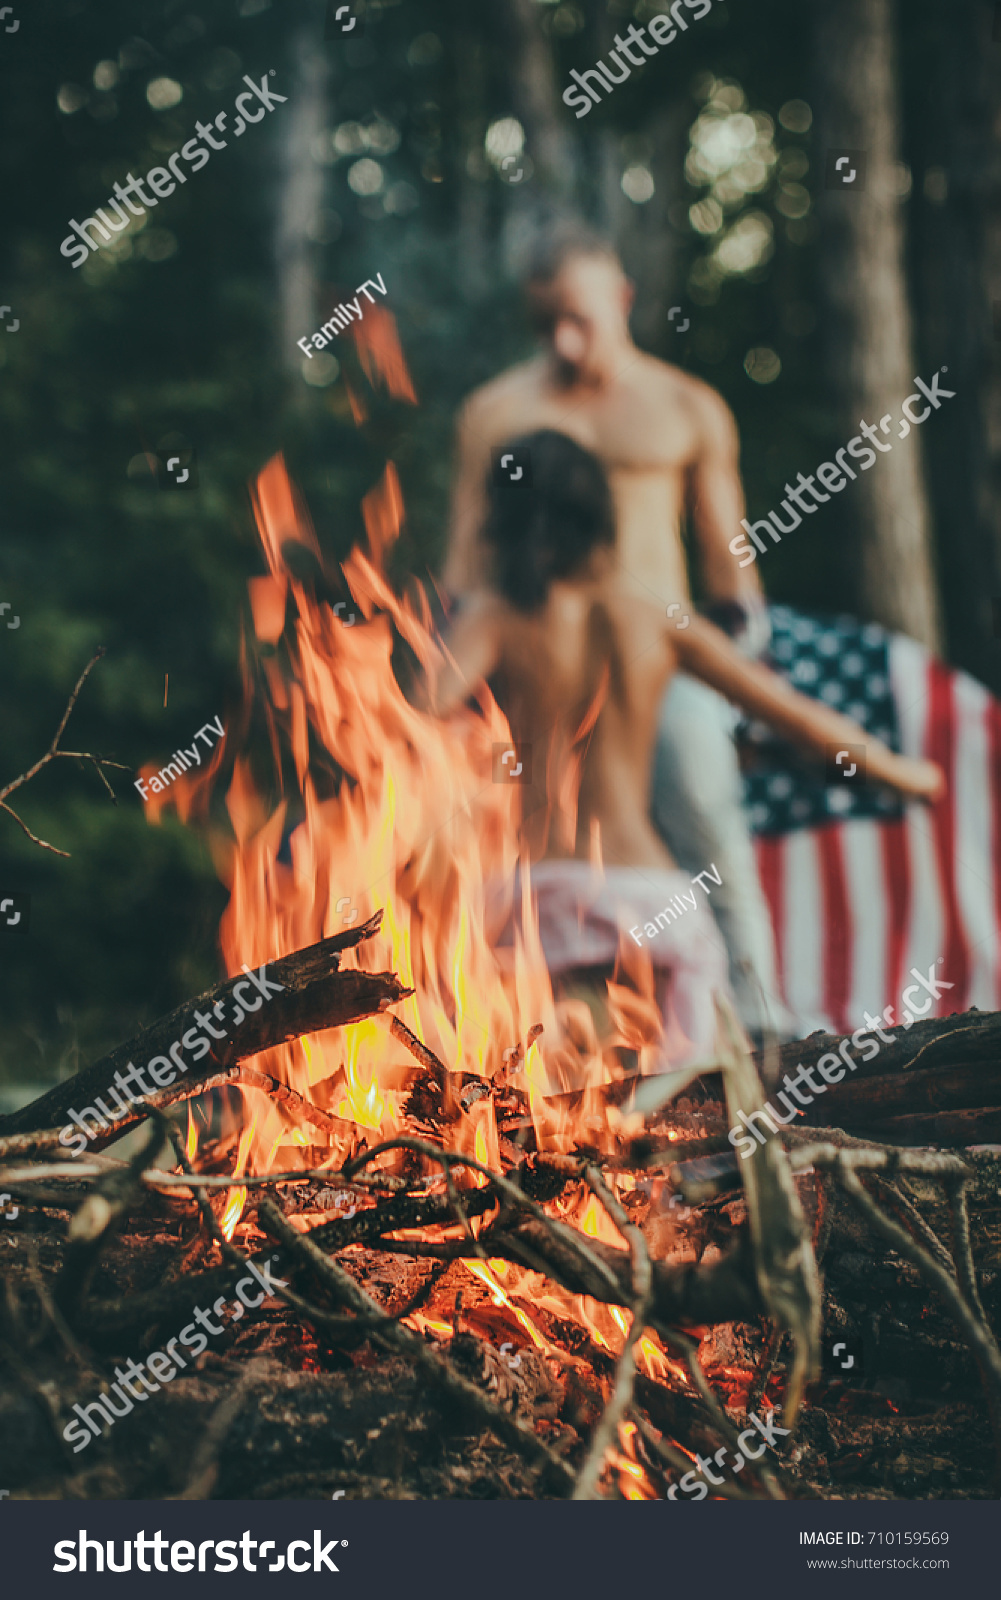 casey conway share sex by the campfire photos